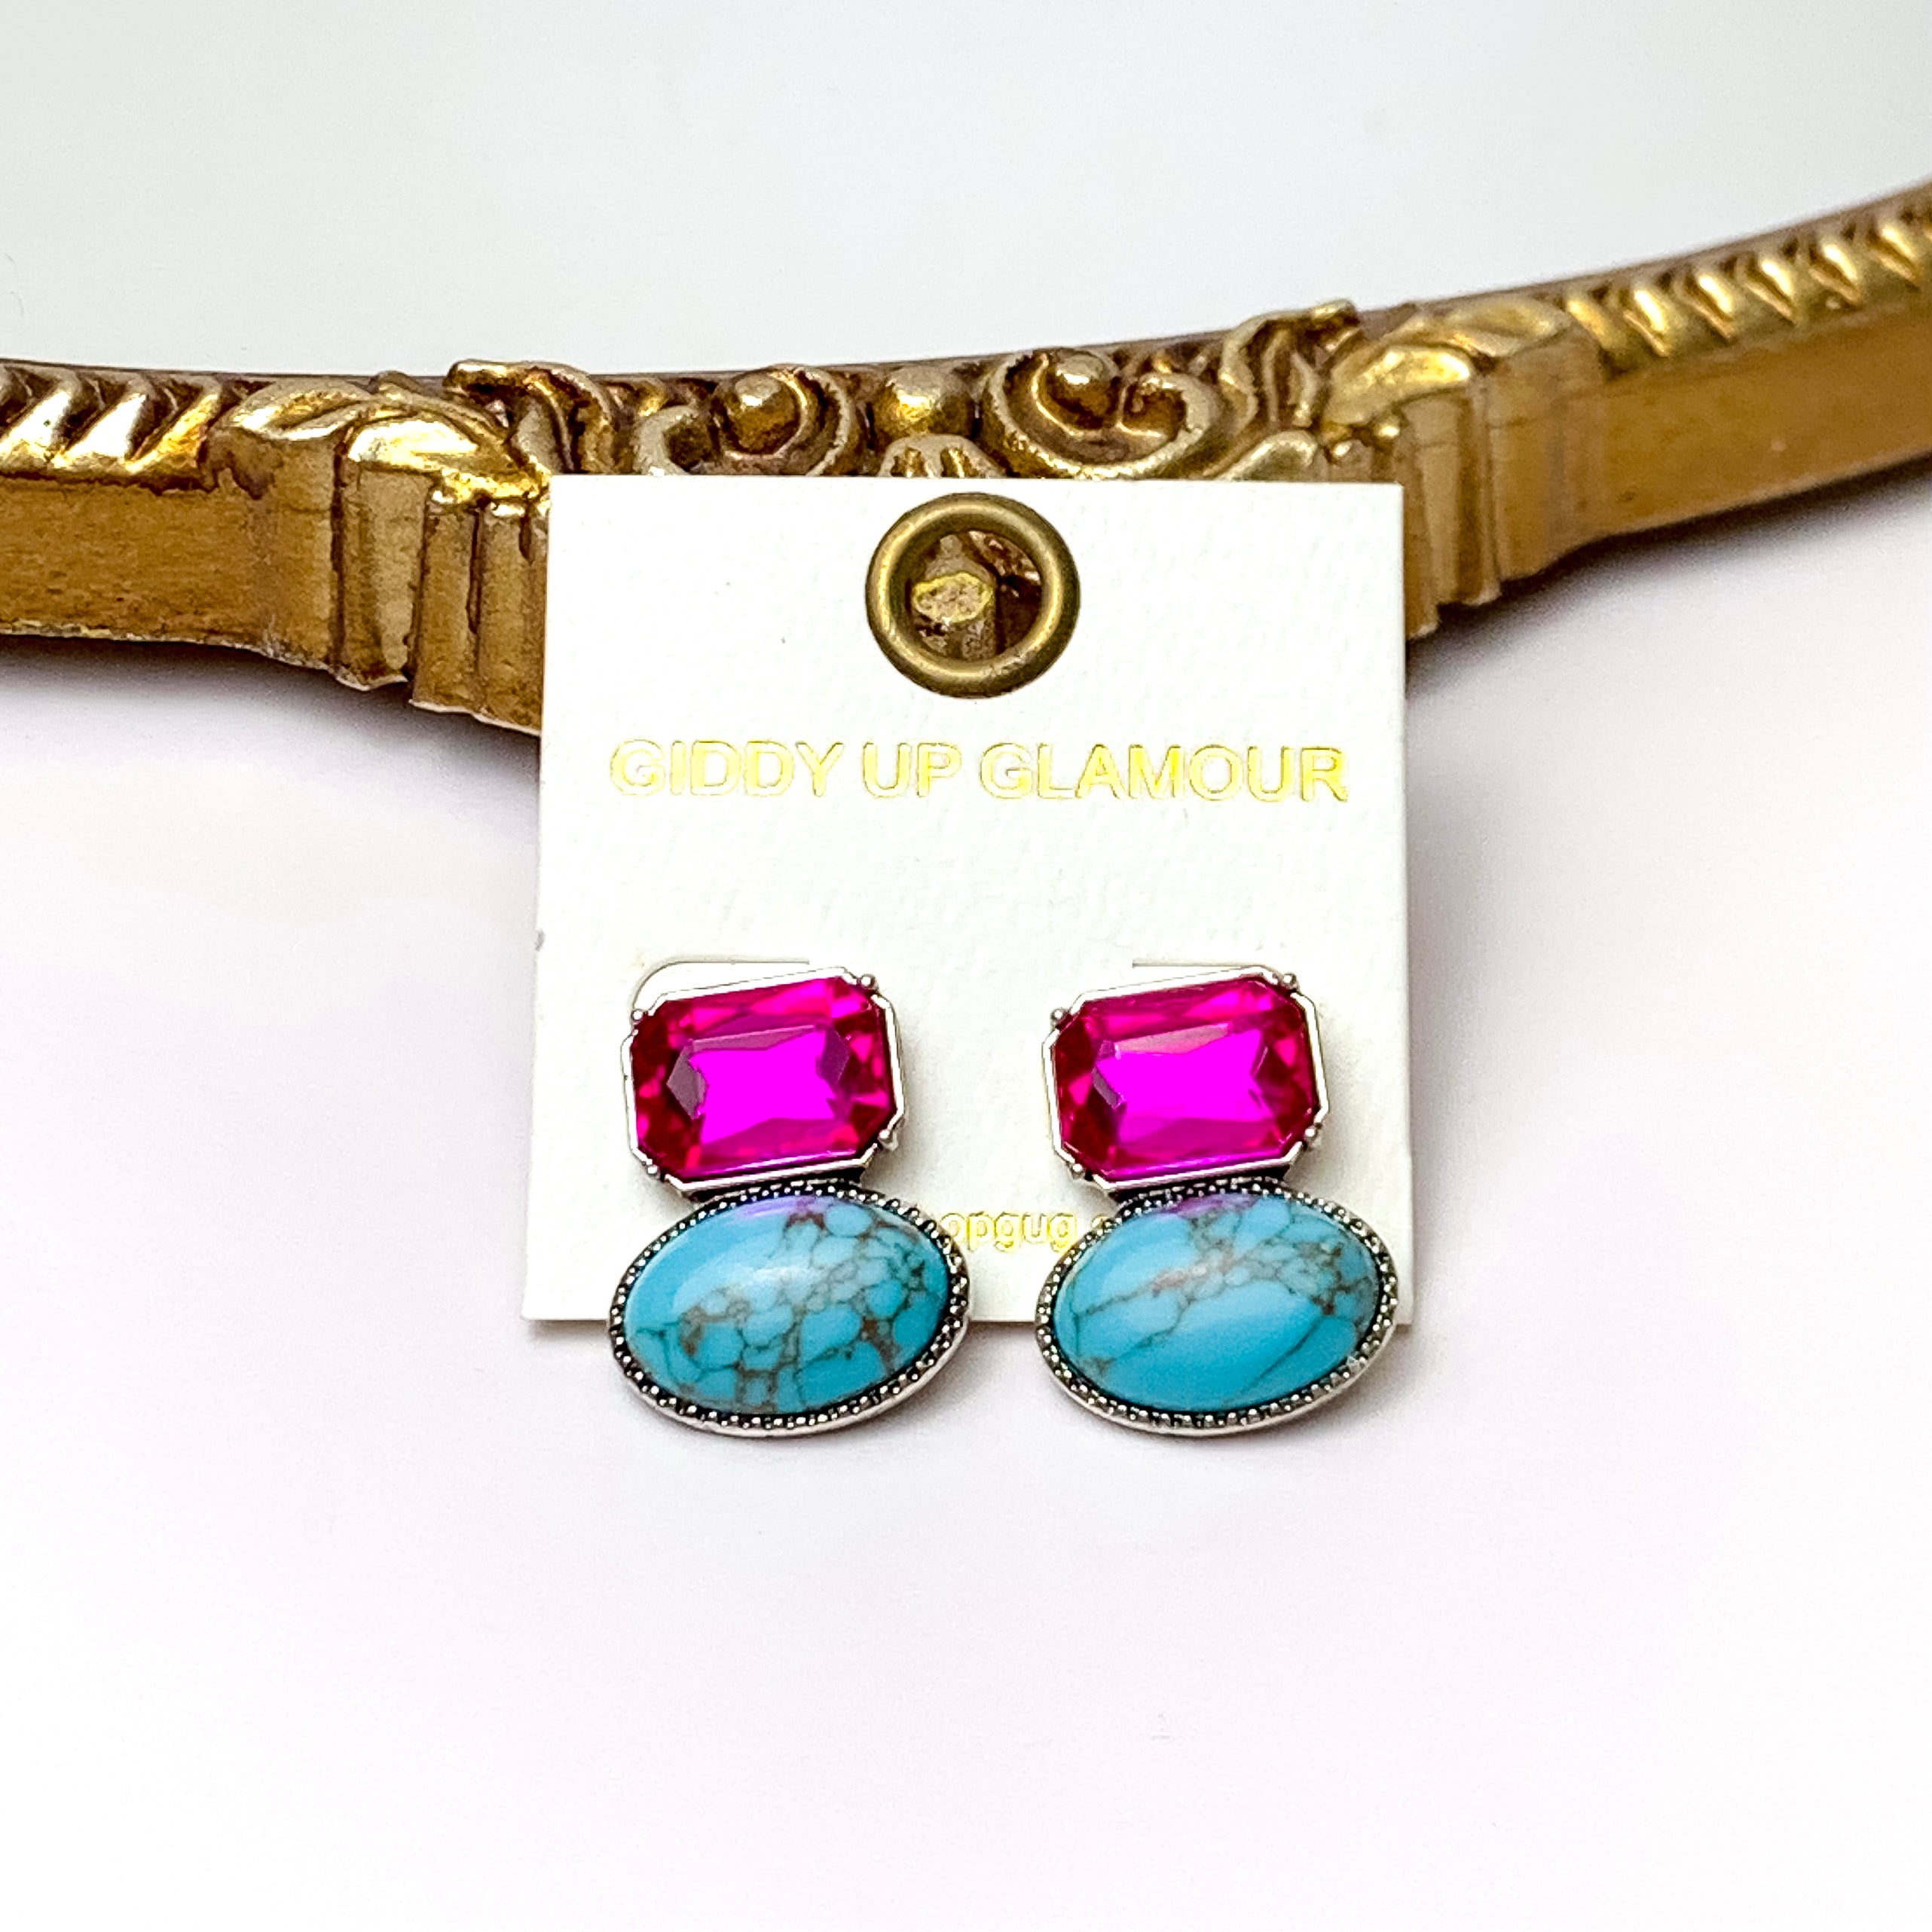 Fuchsia Rhinestone and Faux Turquoise Stone Stud Earrings - Giddy Up Glamour Boutique